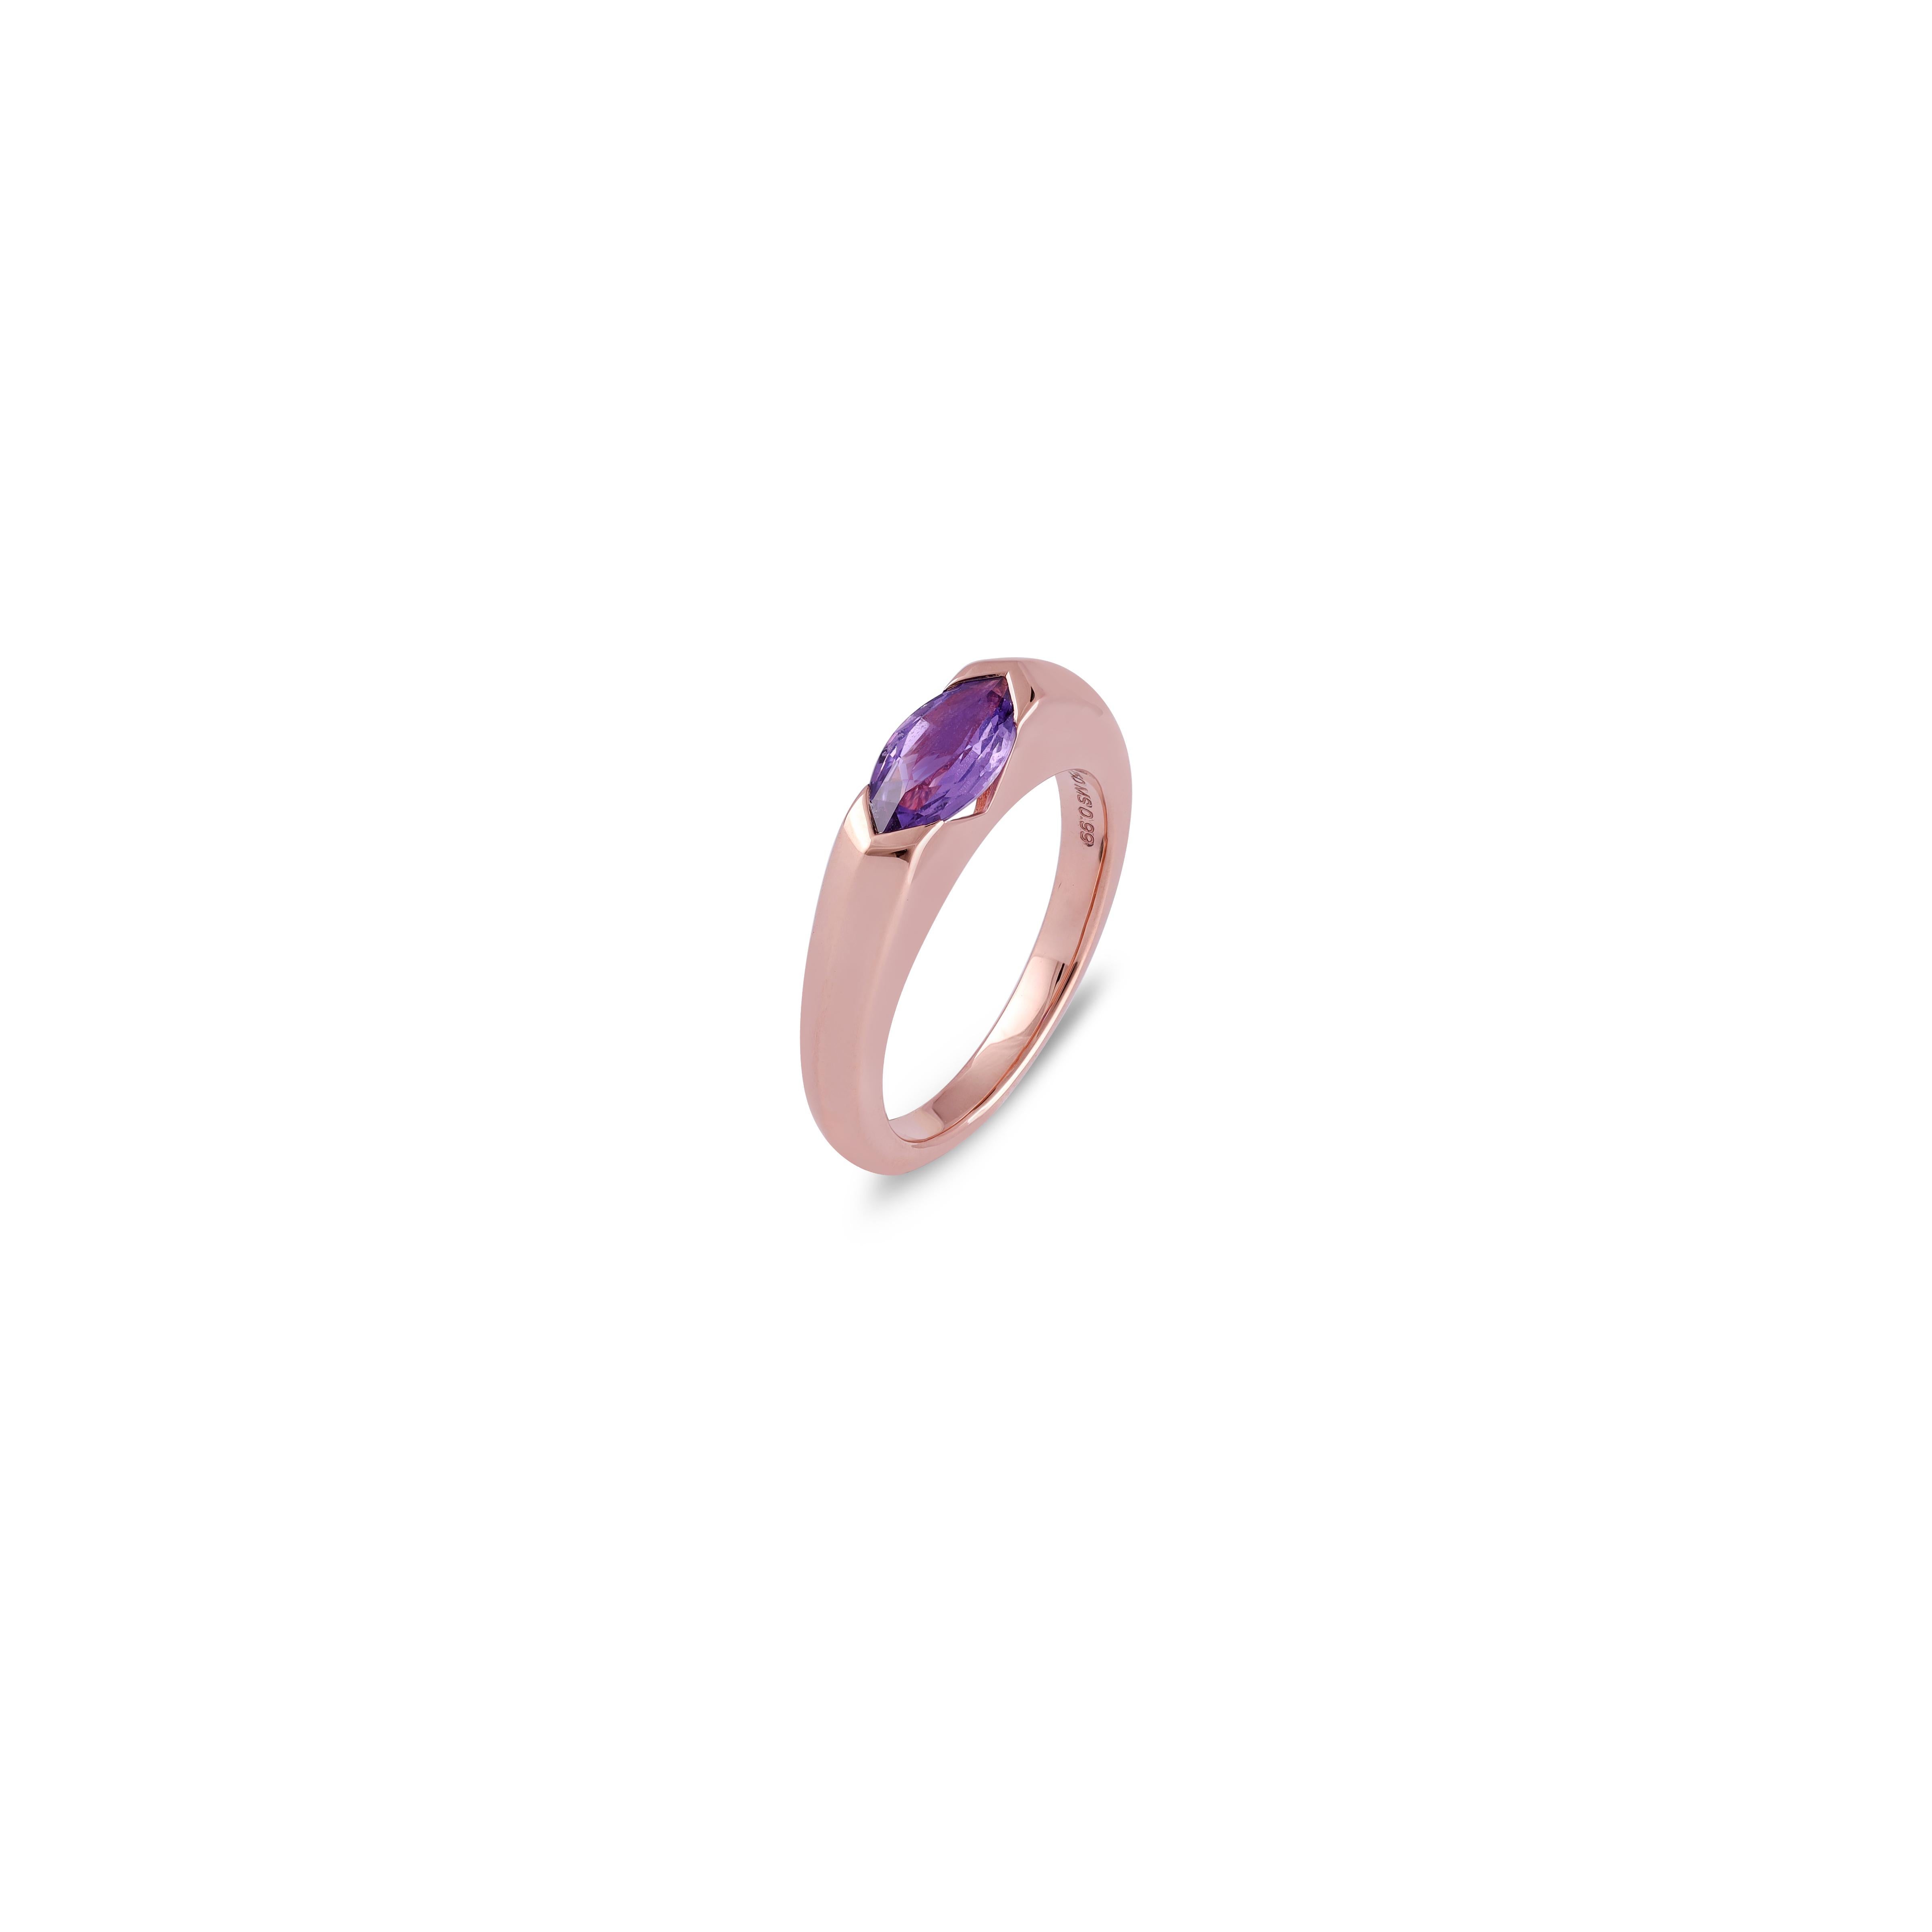 Marquise Cut 0.99 Cts Clear Multi Sapphire Ring in 18k Rose Gold For Sale